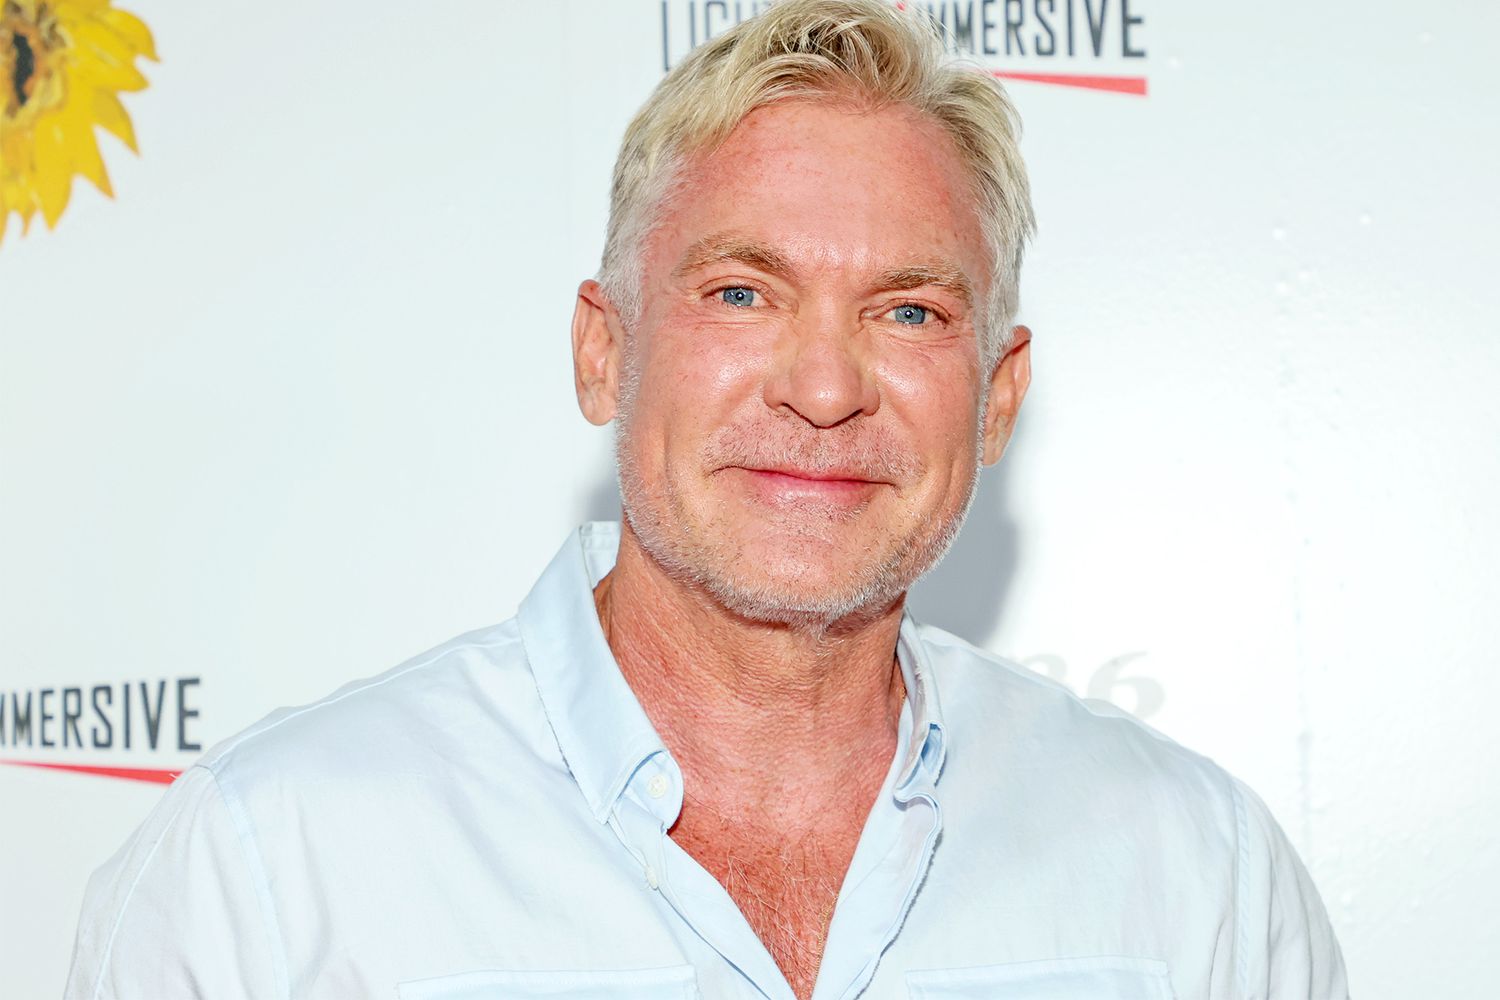 NEW YORK, NEW YORK - JUNE 08: Sam Champion attends the Immersive Van Gogh Opening Night at Pier 36 on June 08, 2021 in New York City. (Photo by Dia Dipasupil/Getty Images)